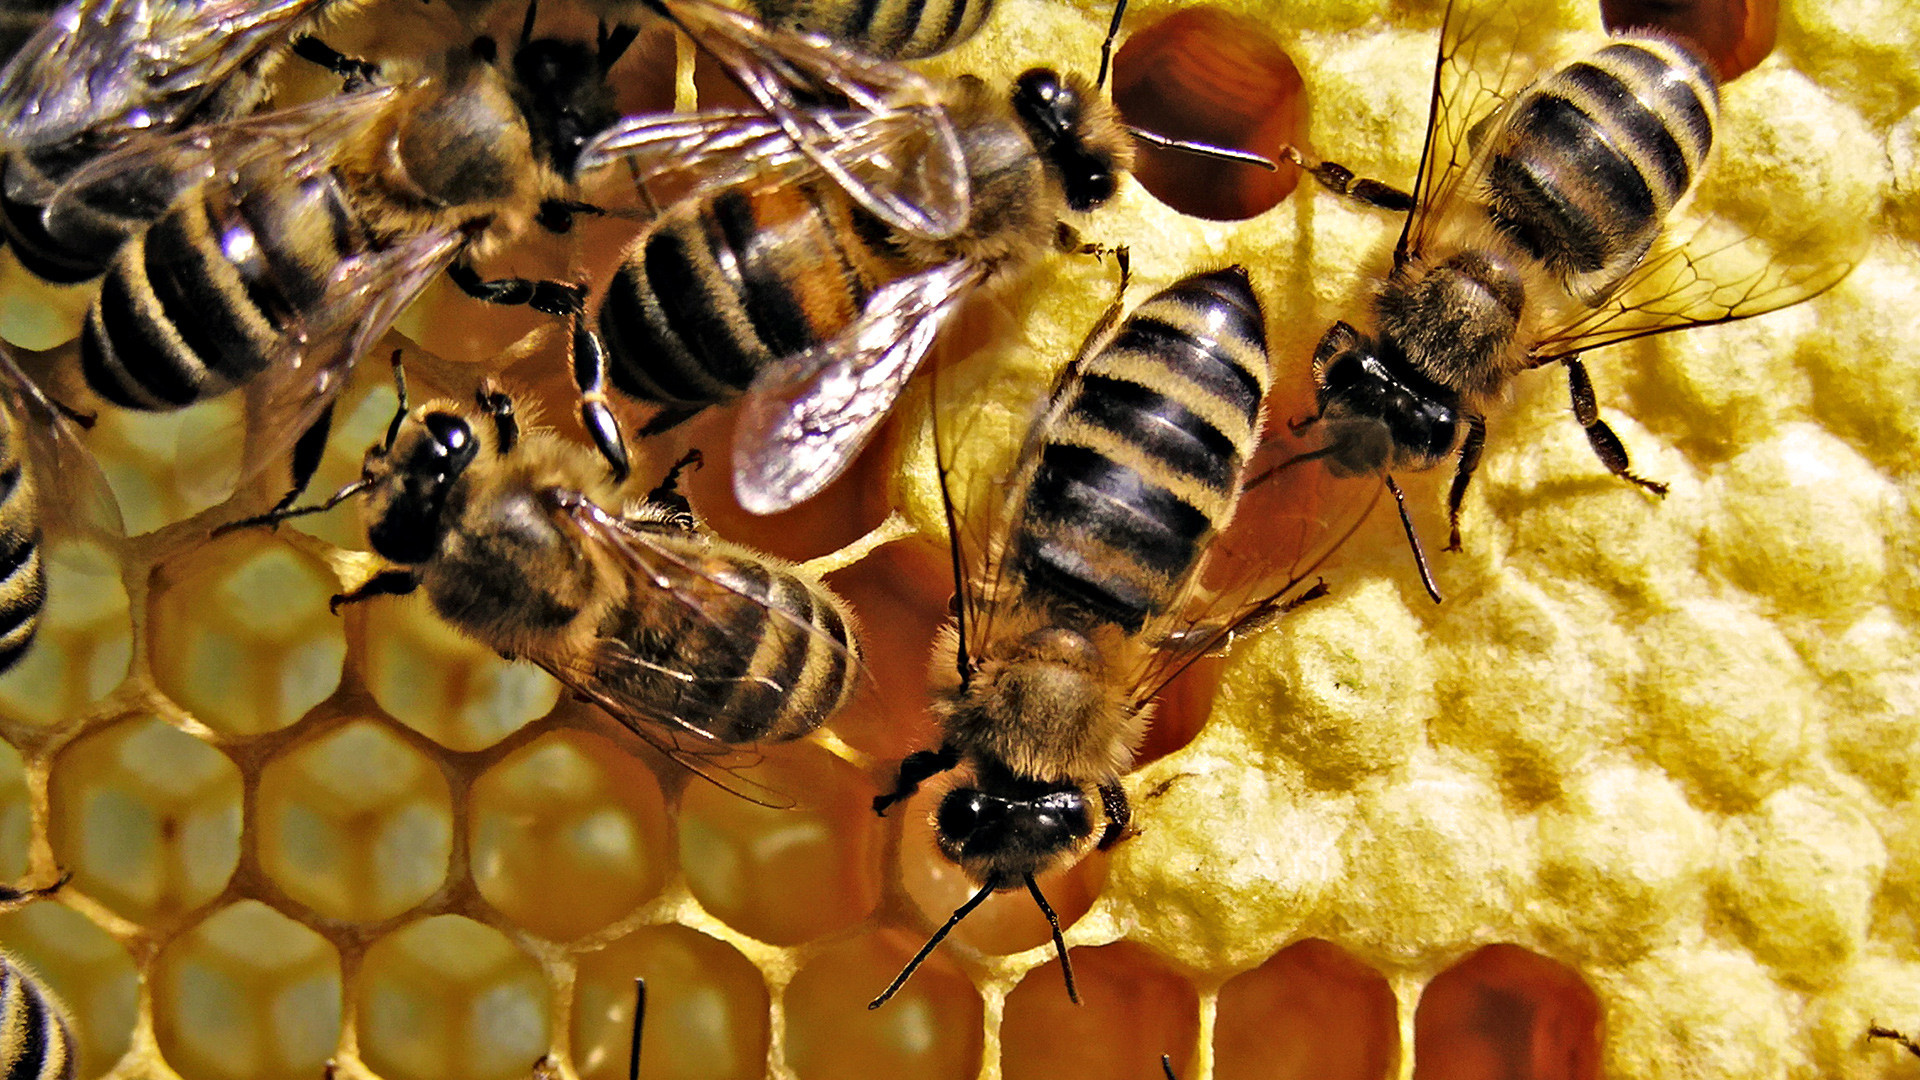 Bee, Nature's architect, Honey-making process, Insect pollination, 1920x1080 Full HD Desktop